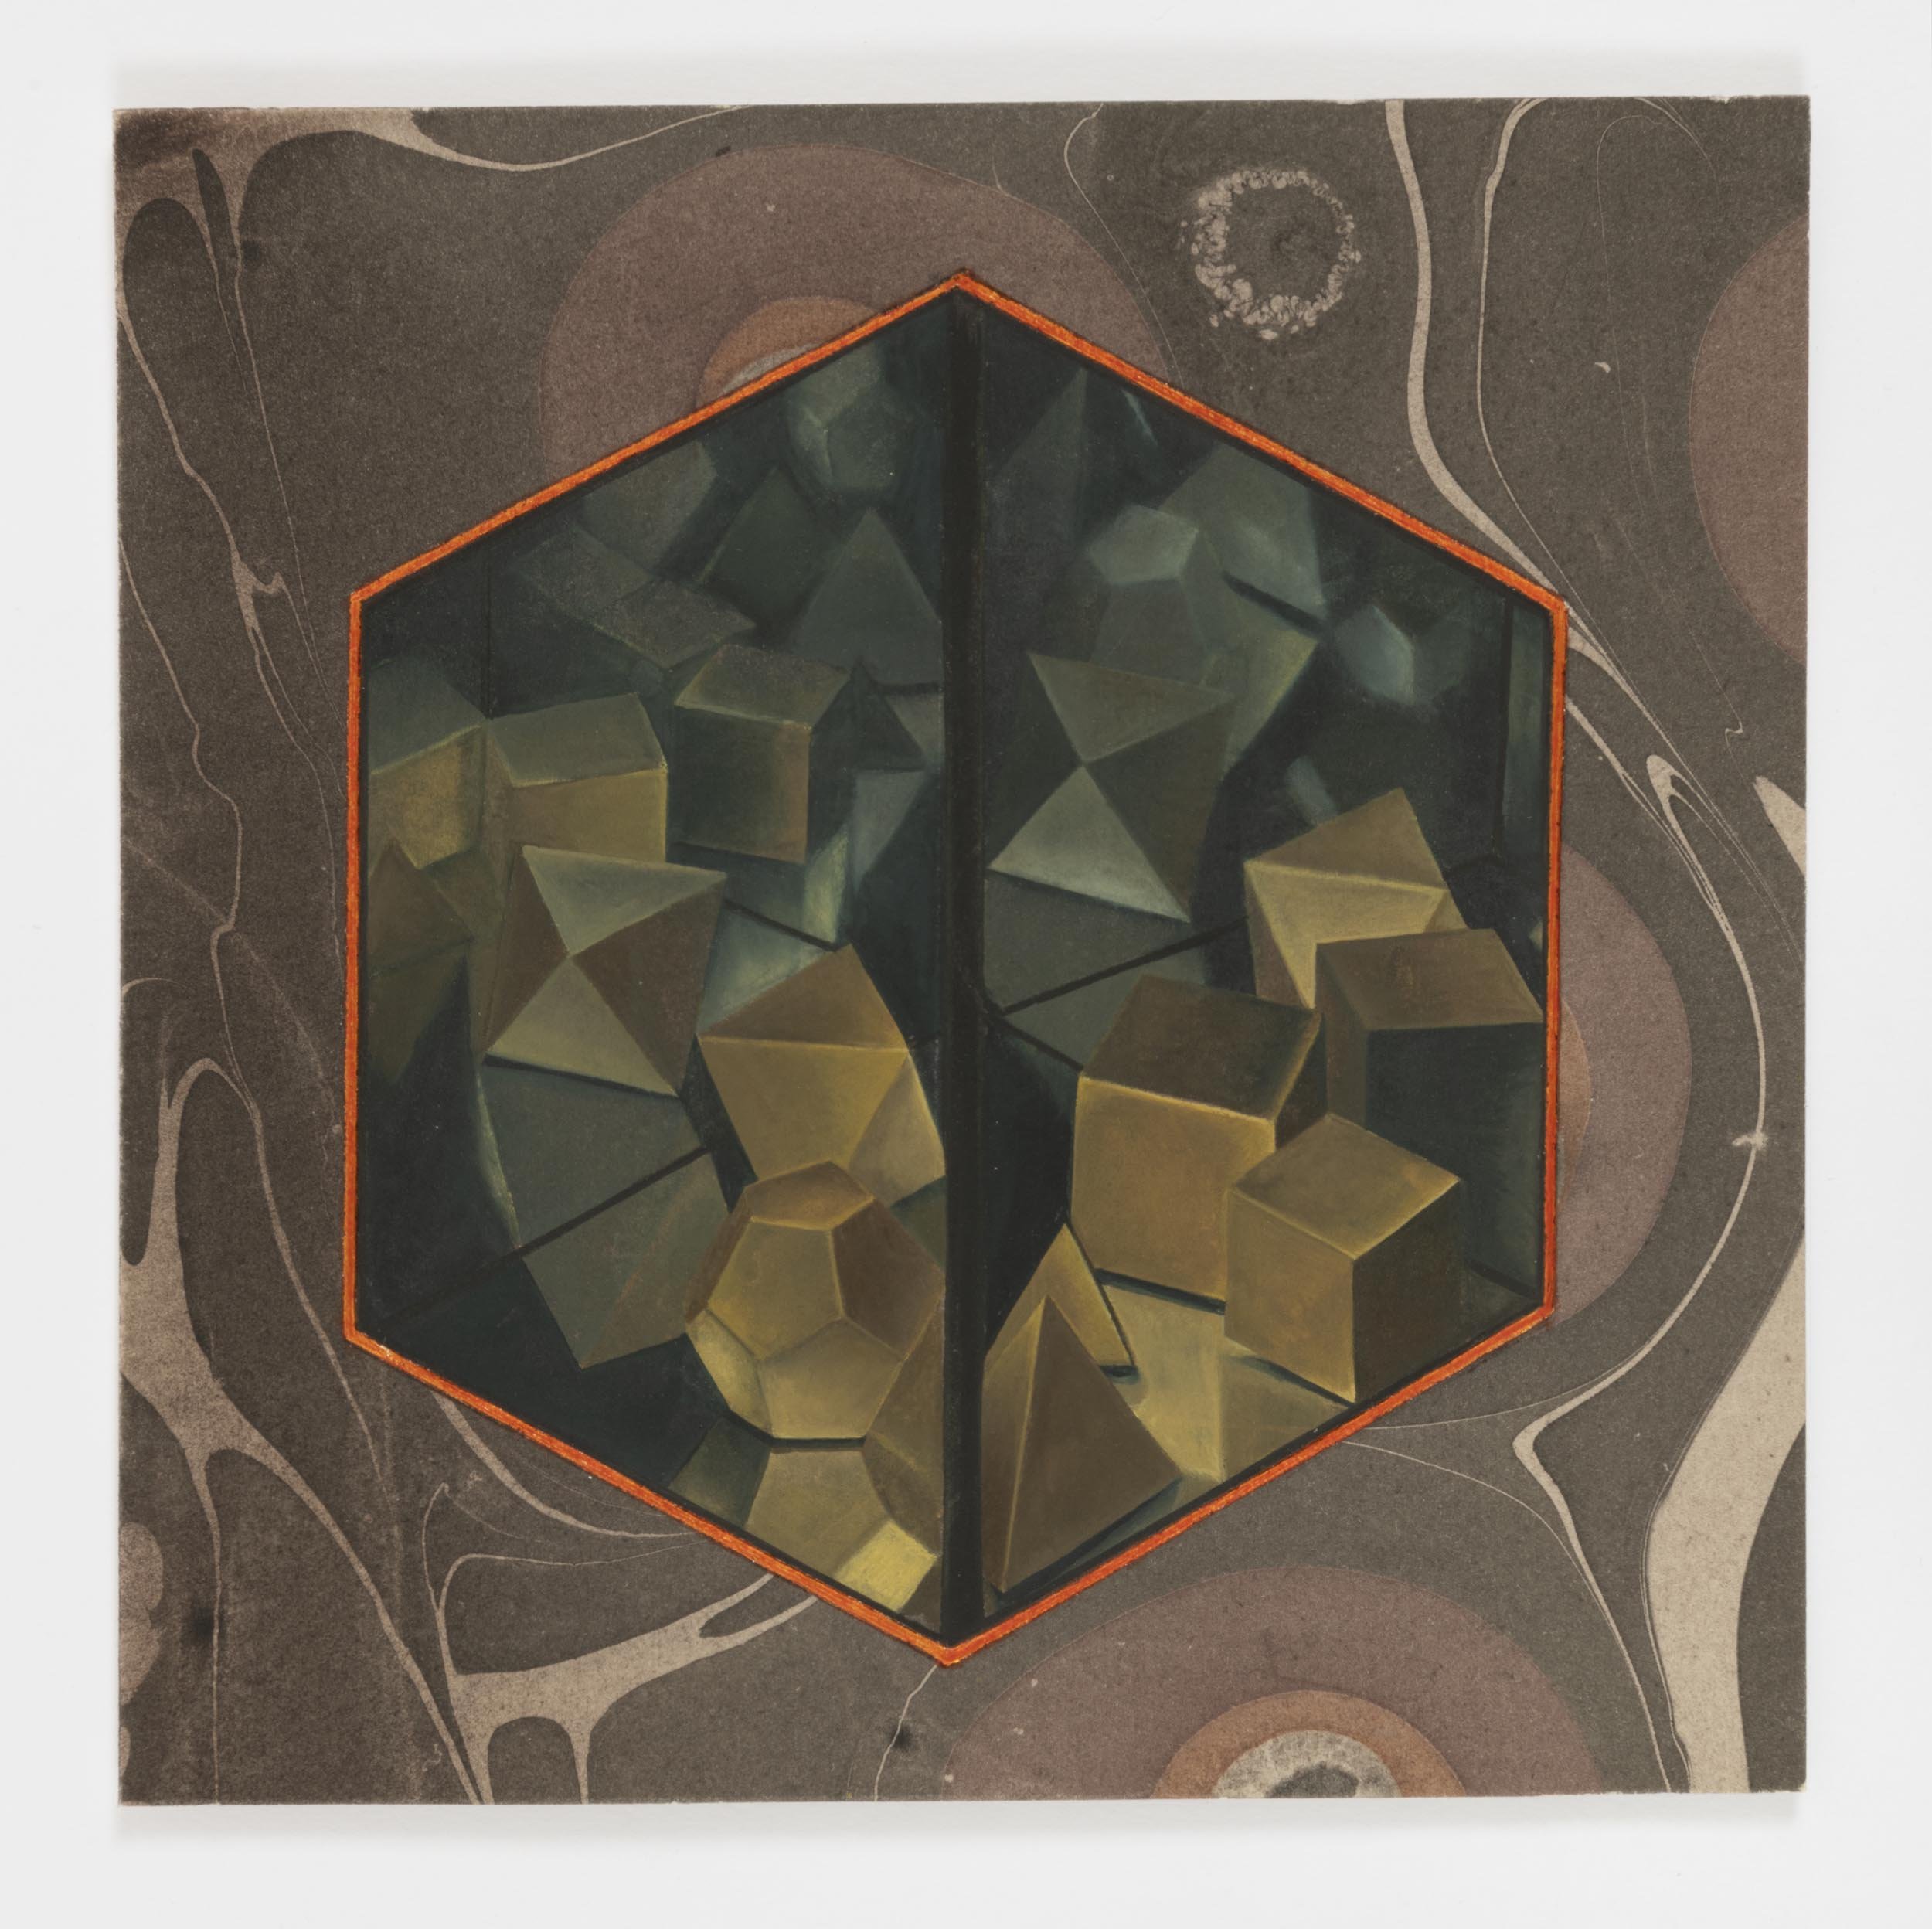   Mirrored Cube 2, 2021 gouache with toned aluminum leaf on paper 7 x 7 in. &nbsp; 18 x 18 cm.  